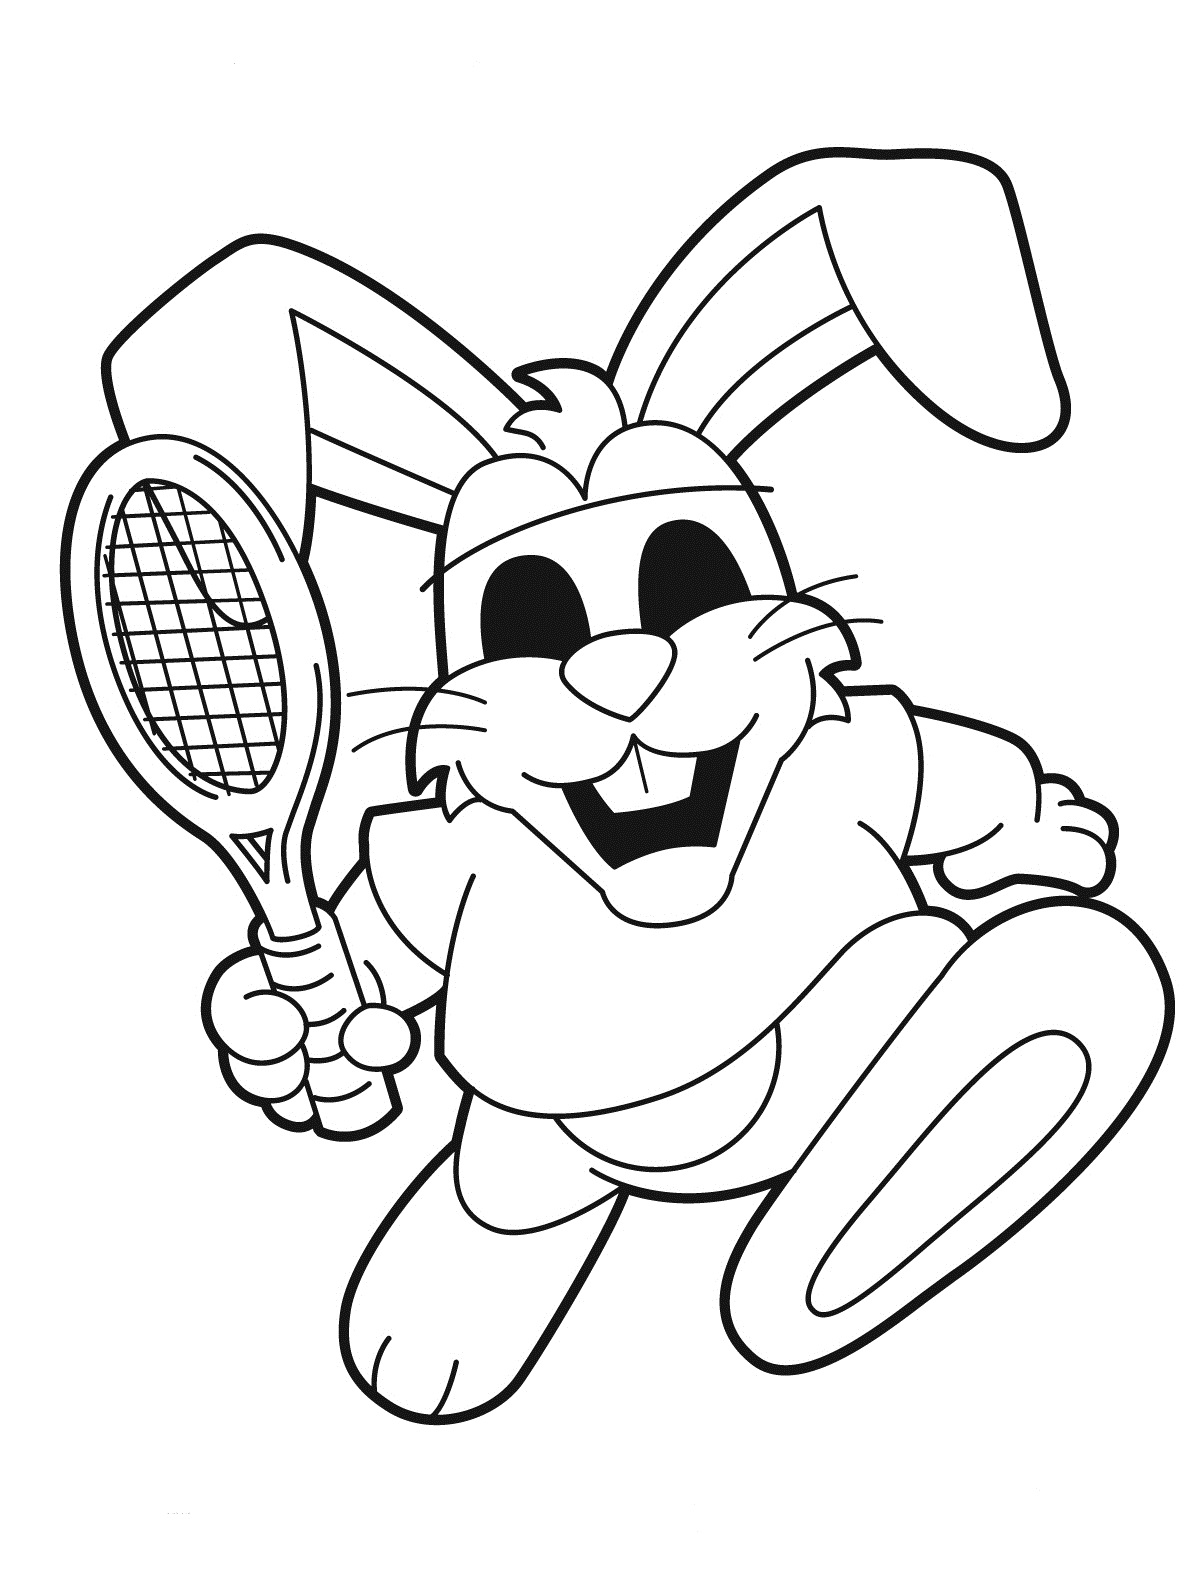 Rabbit Playing Tennis Coloring Page